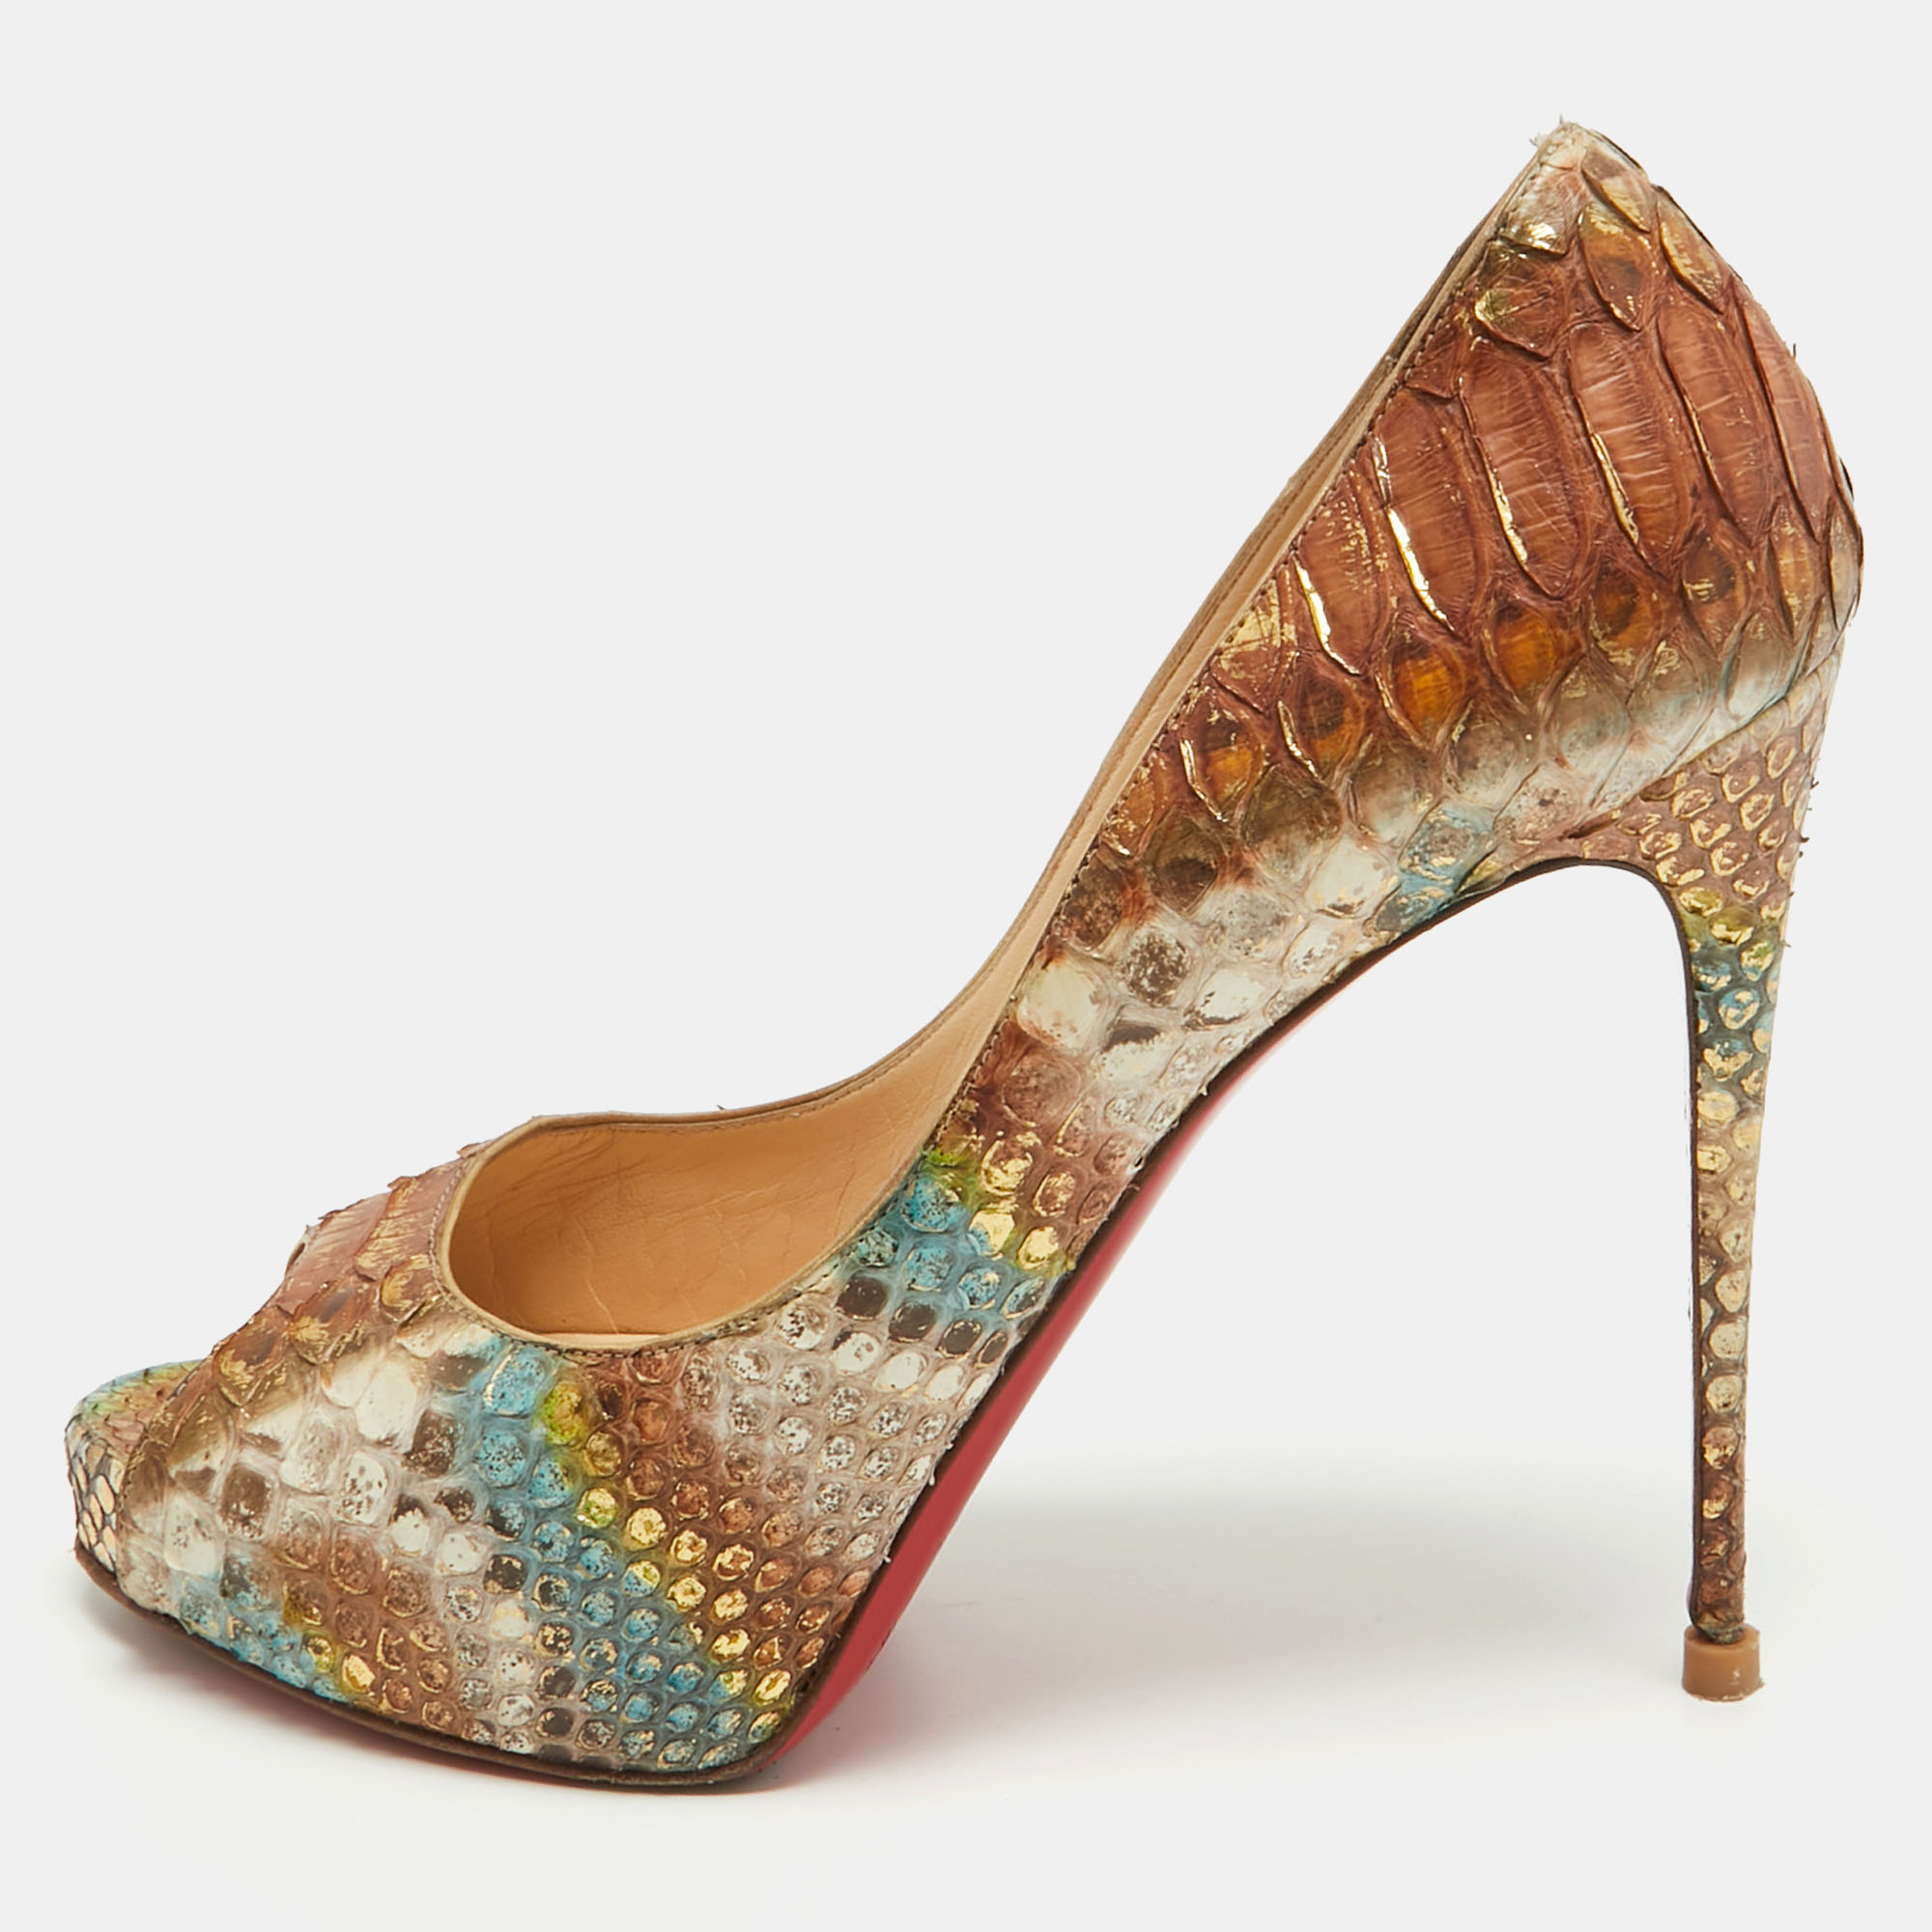 Pre-owned Christian Louboutin Multicolor Python New Very Prive Pumps Size 40.5